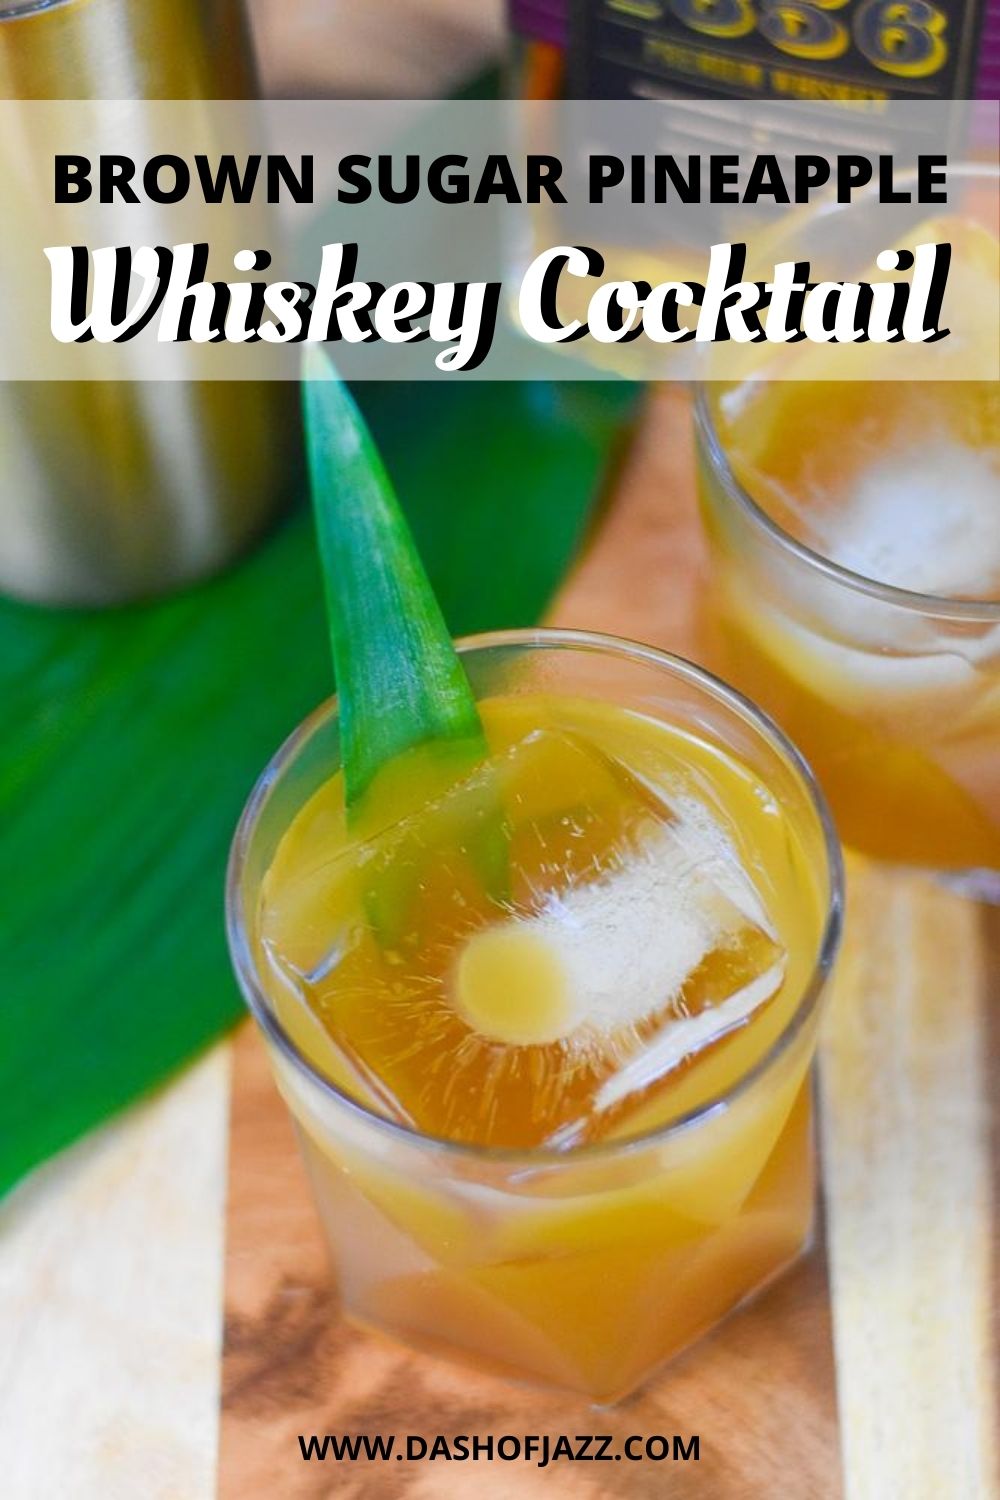 whiskey cocktail over ice with text overlay "brown sugar pineapple whiskey cocktail"